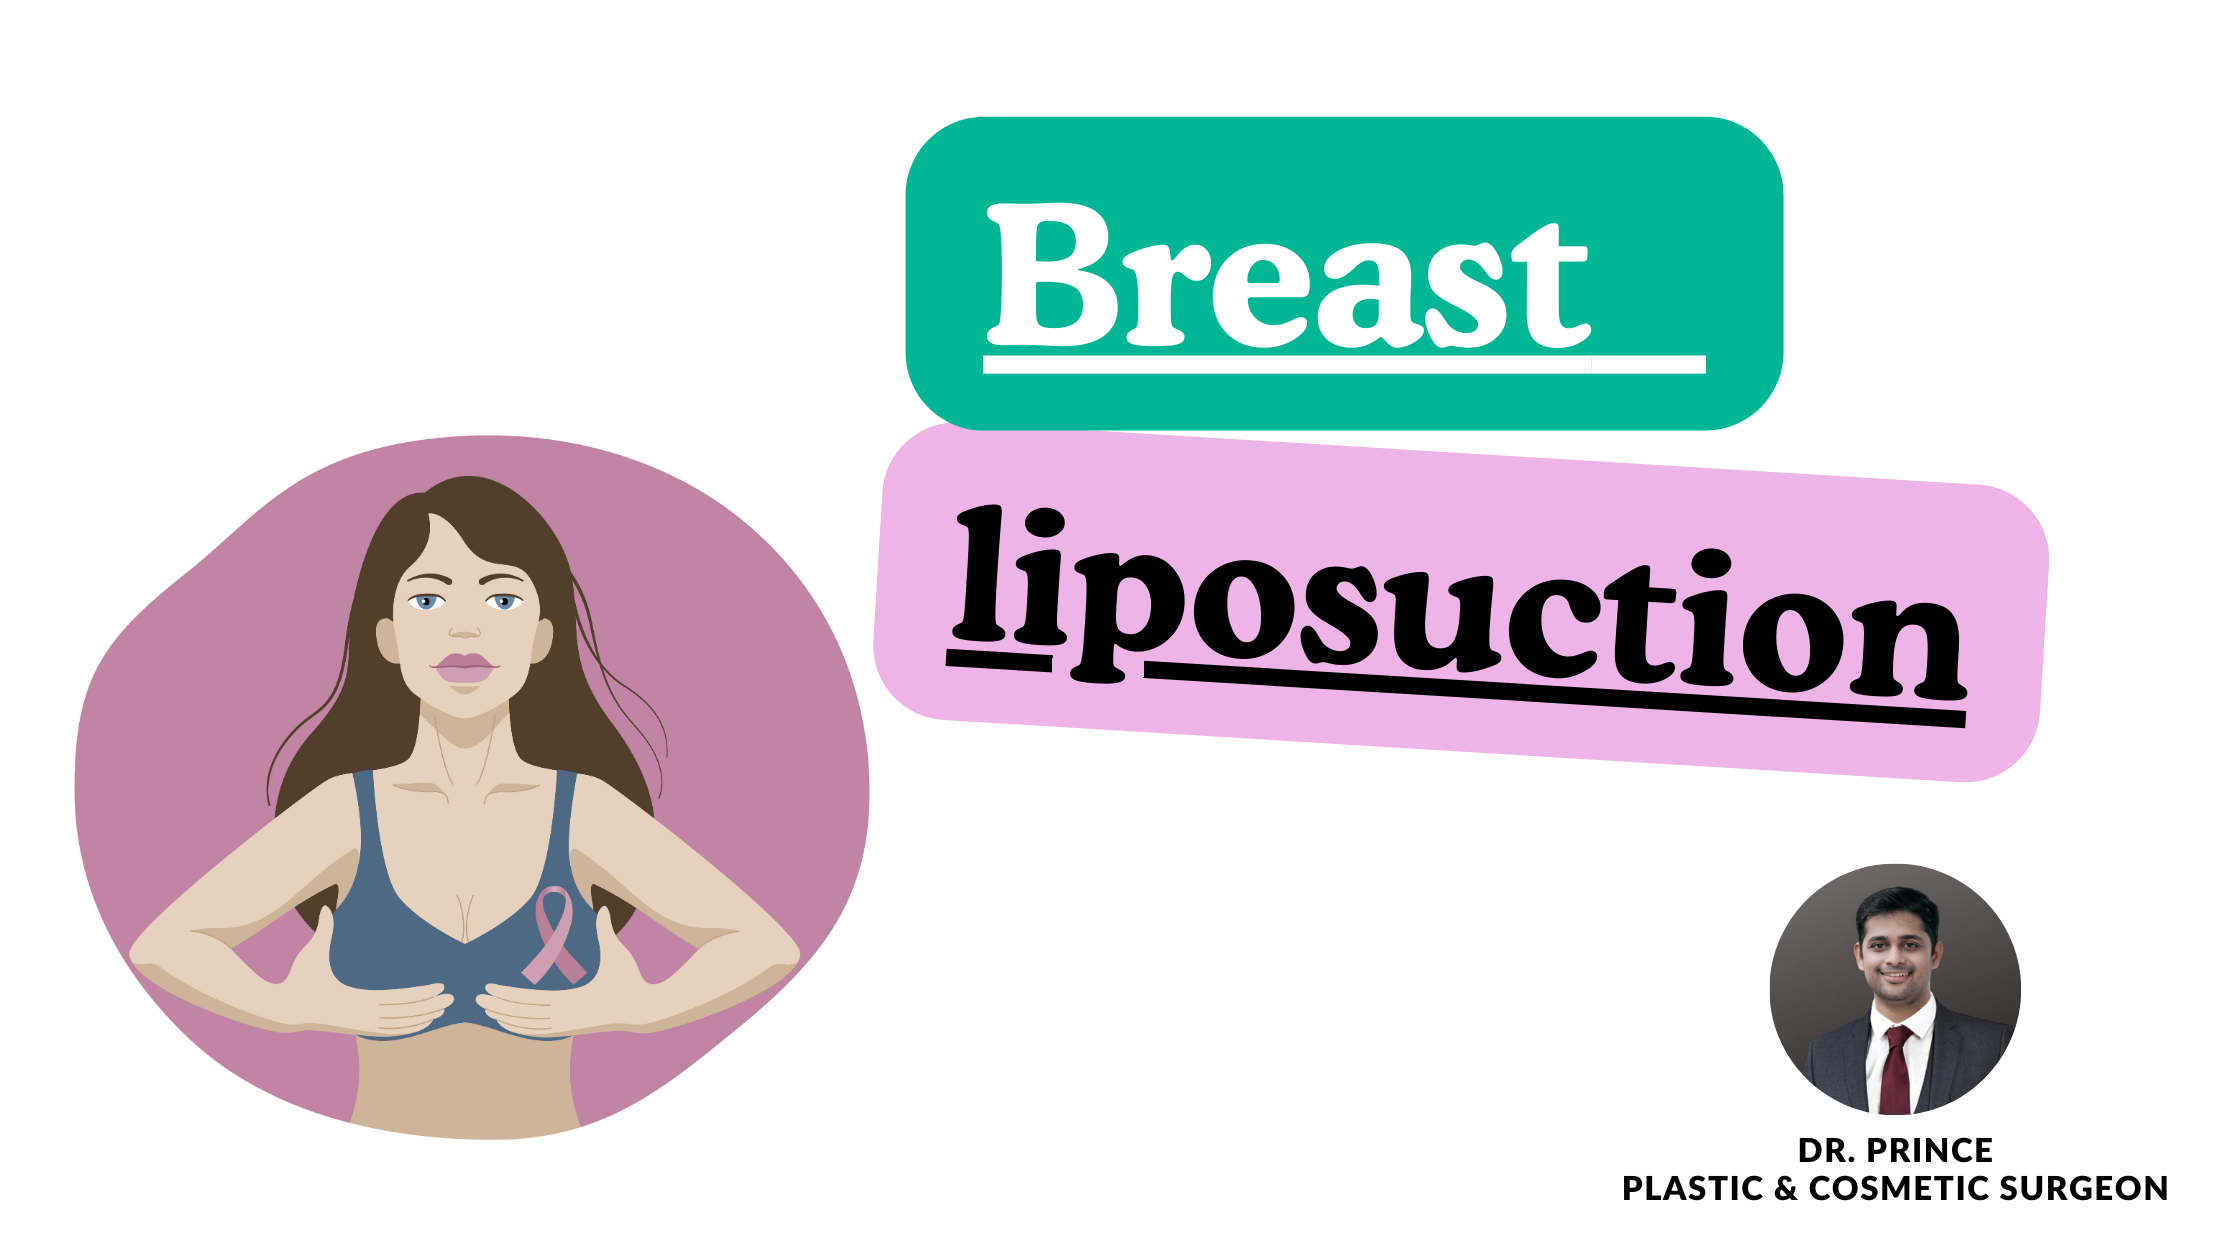 Dr. Prince performs breast liposuction, achieving tailored contours for natural and harmonious breast aesthetics.